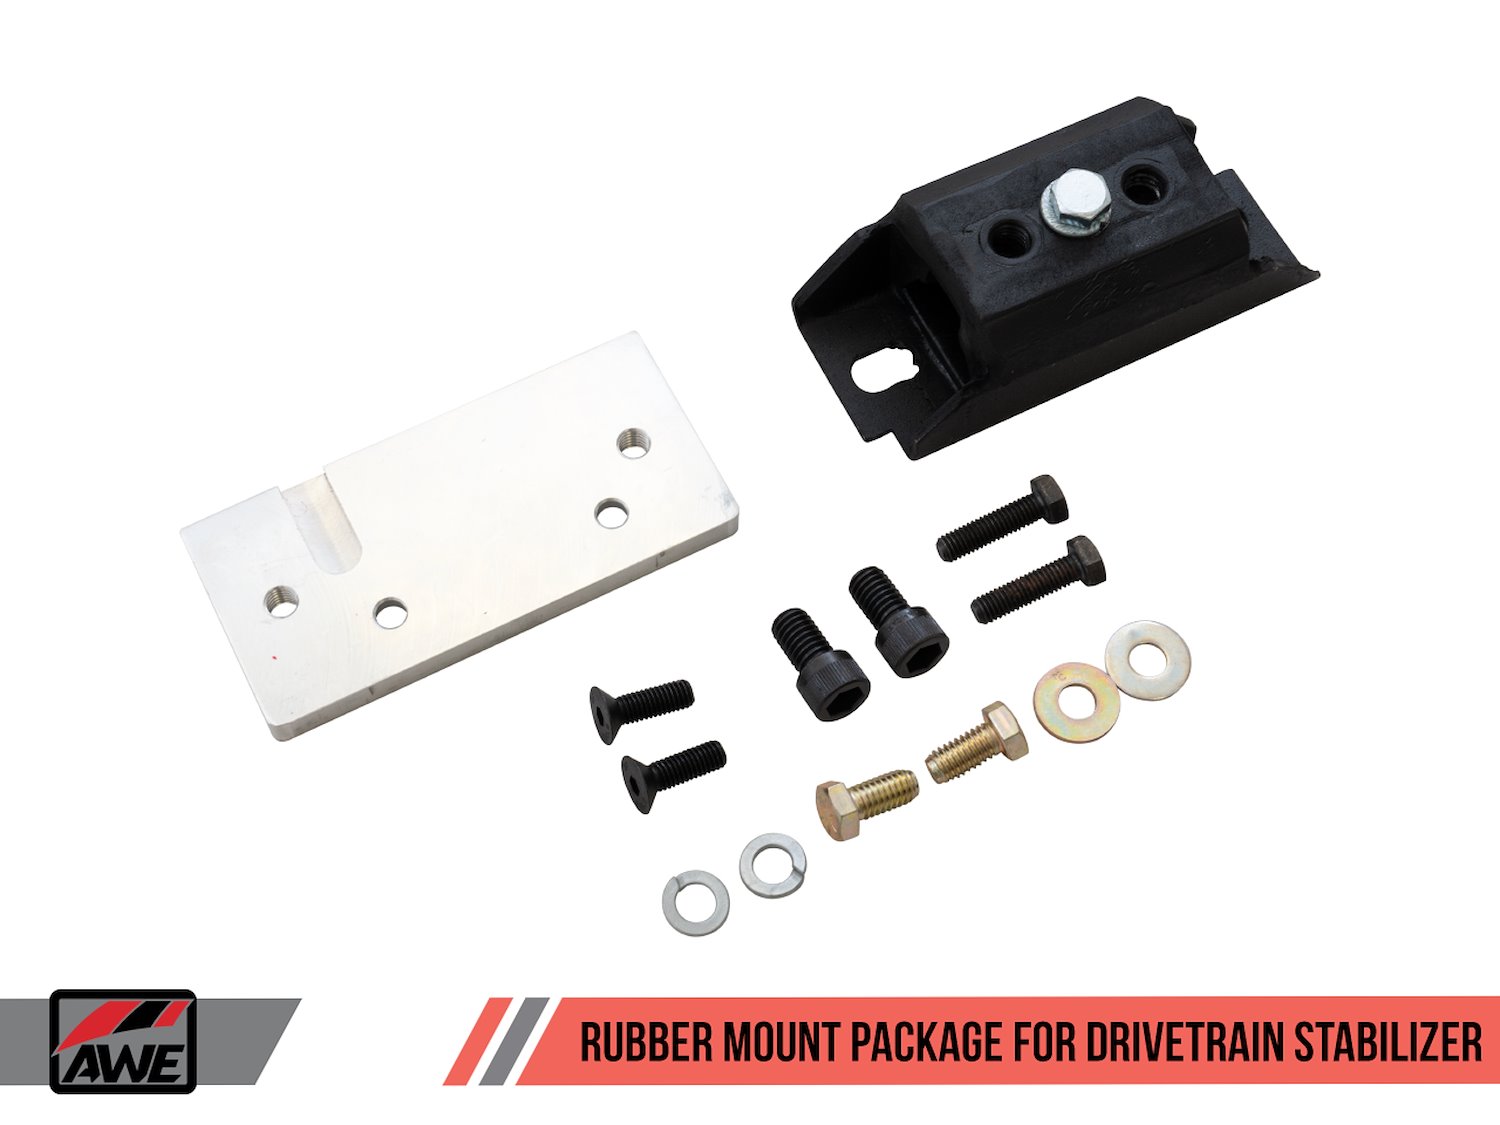 er Mount Package for AWE Drivetrain Stabilizer (DTS)